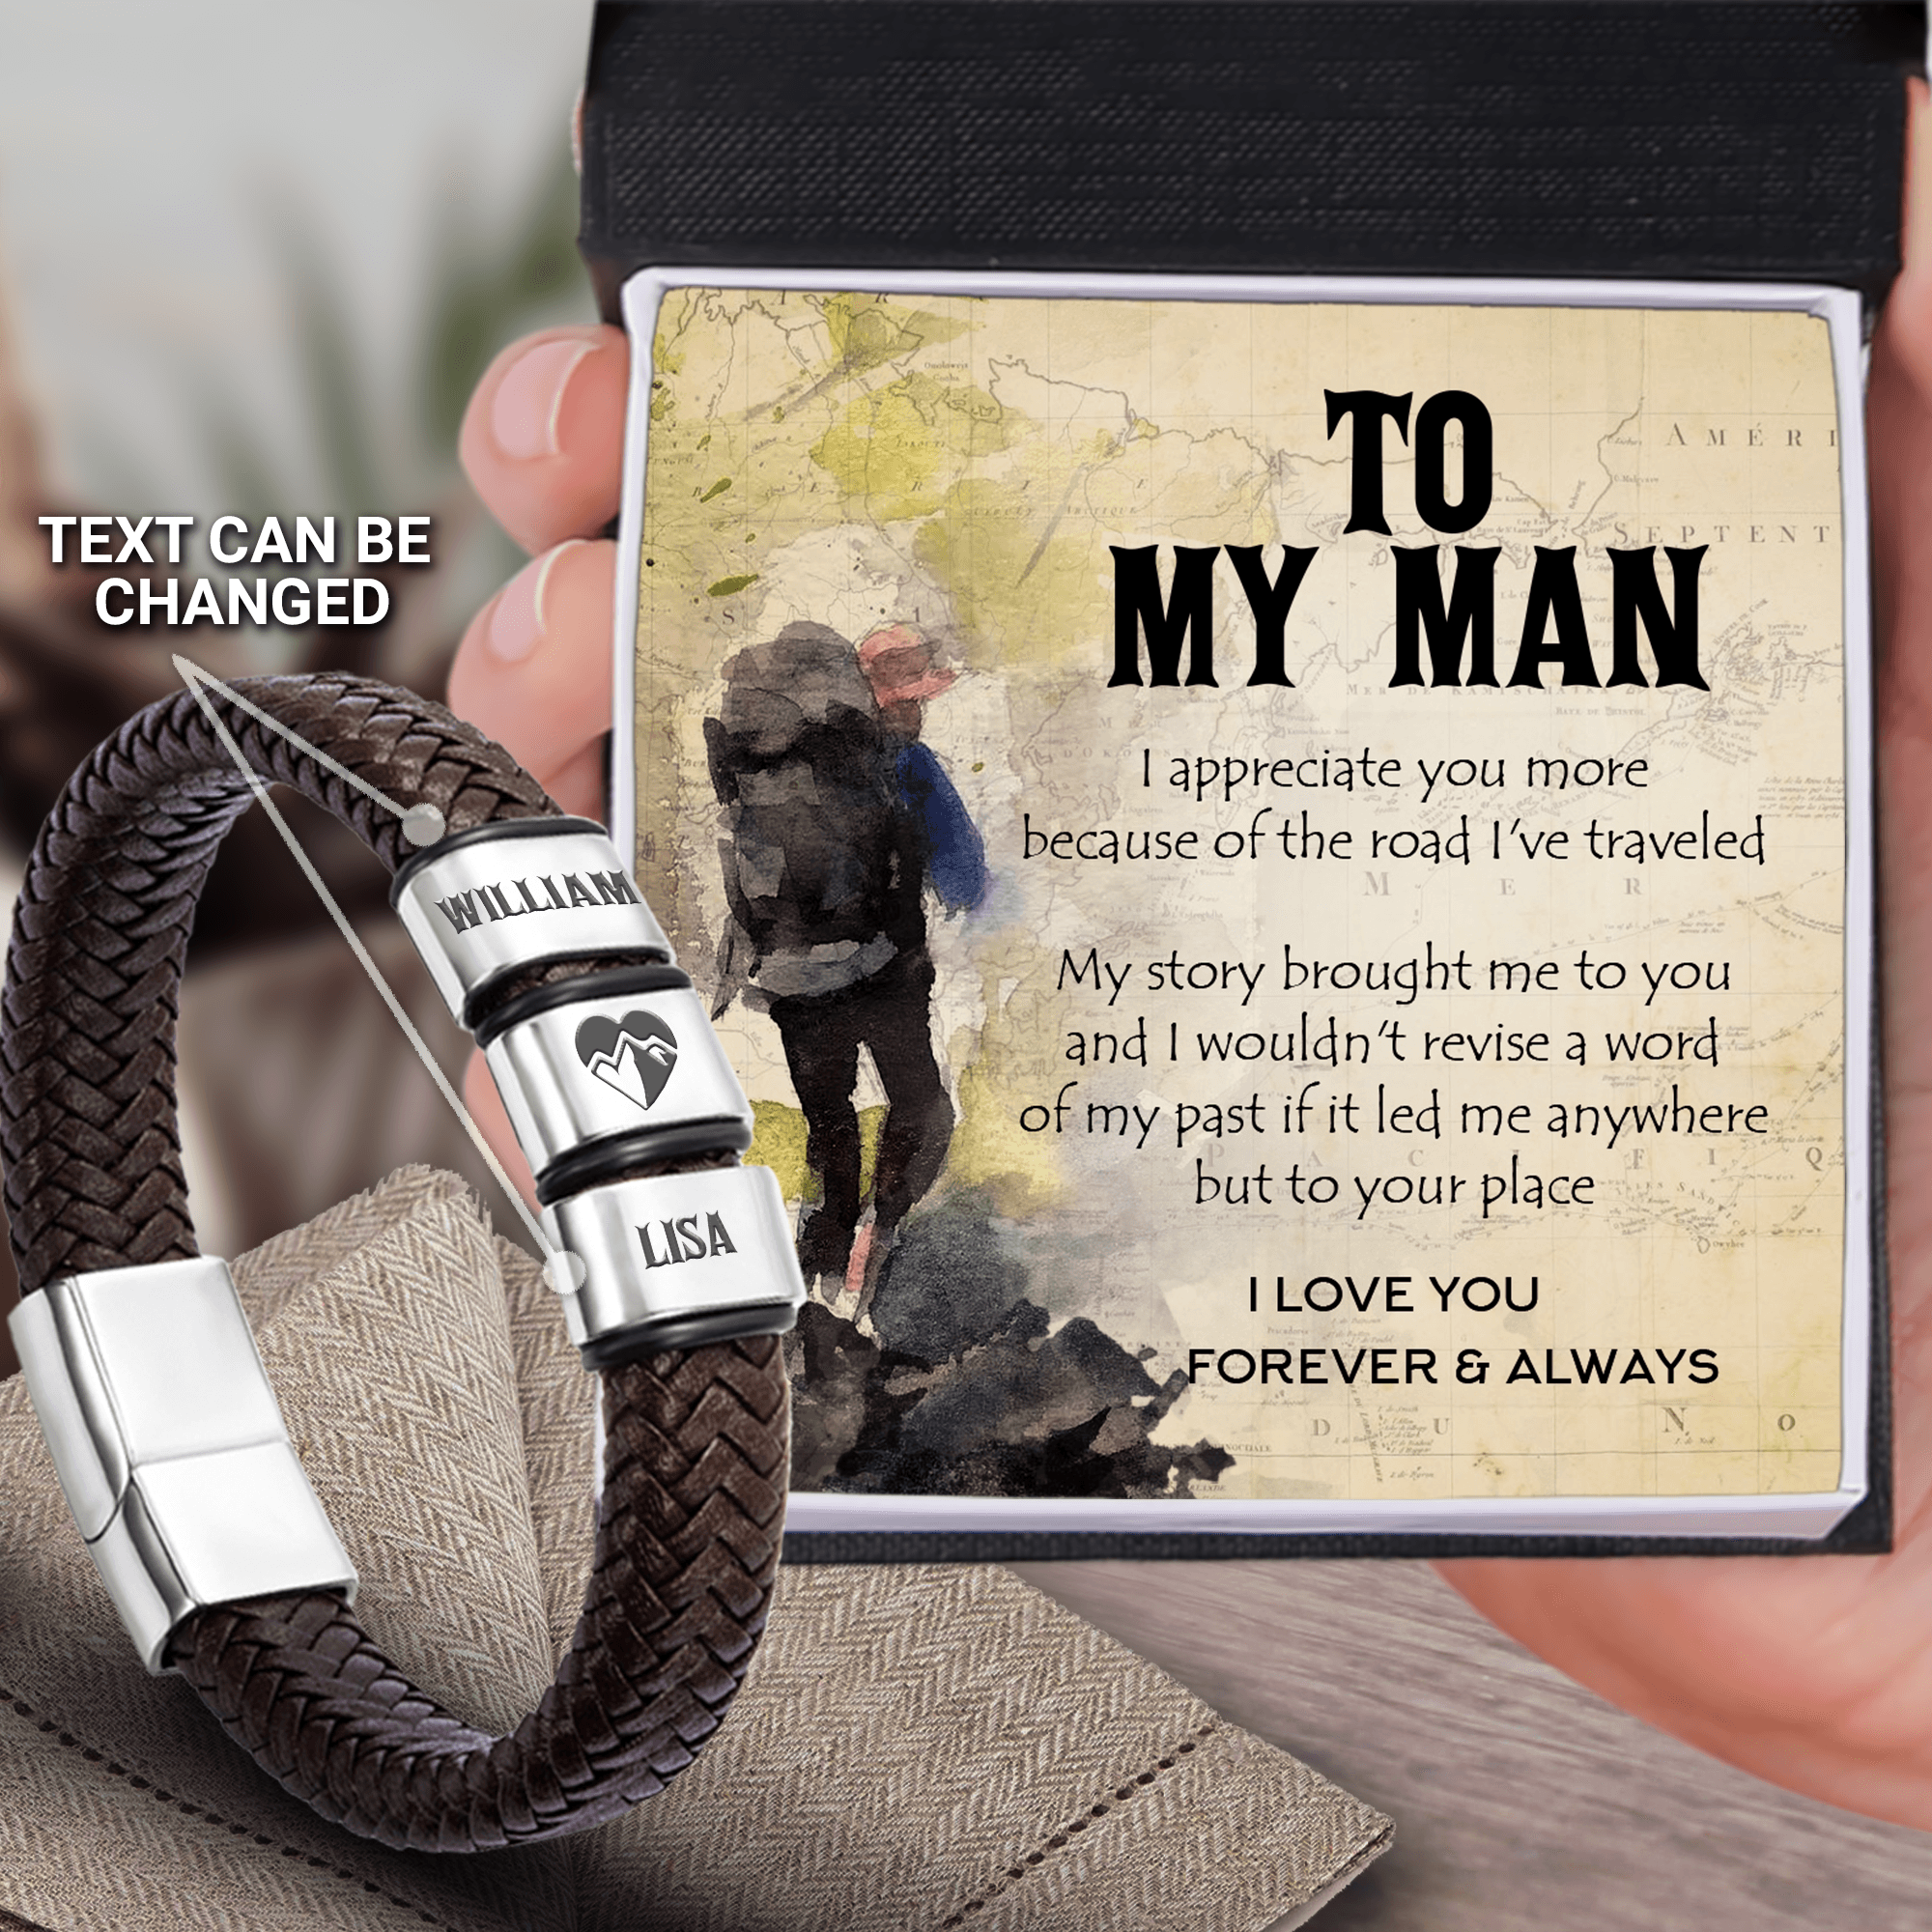 Personalised Leather Bracelet - Hiking - To My Man - I Love You Forever & Always - Augbzl26024 - Gifts Holder